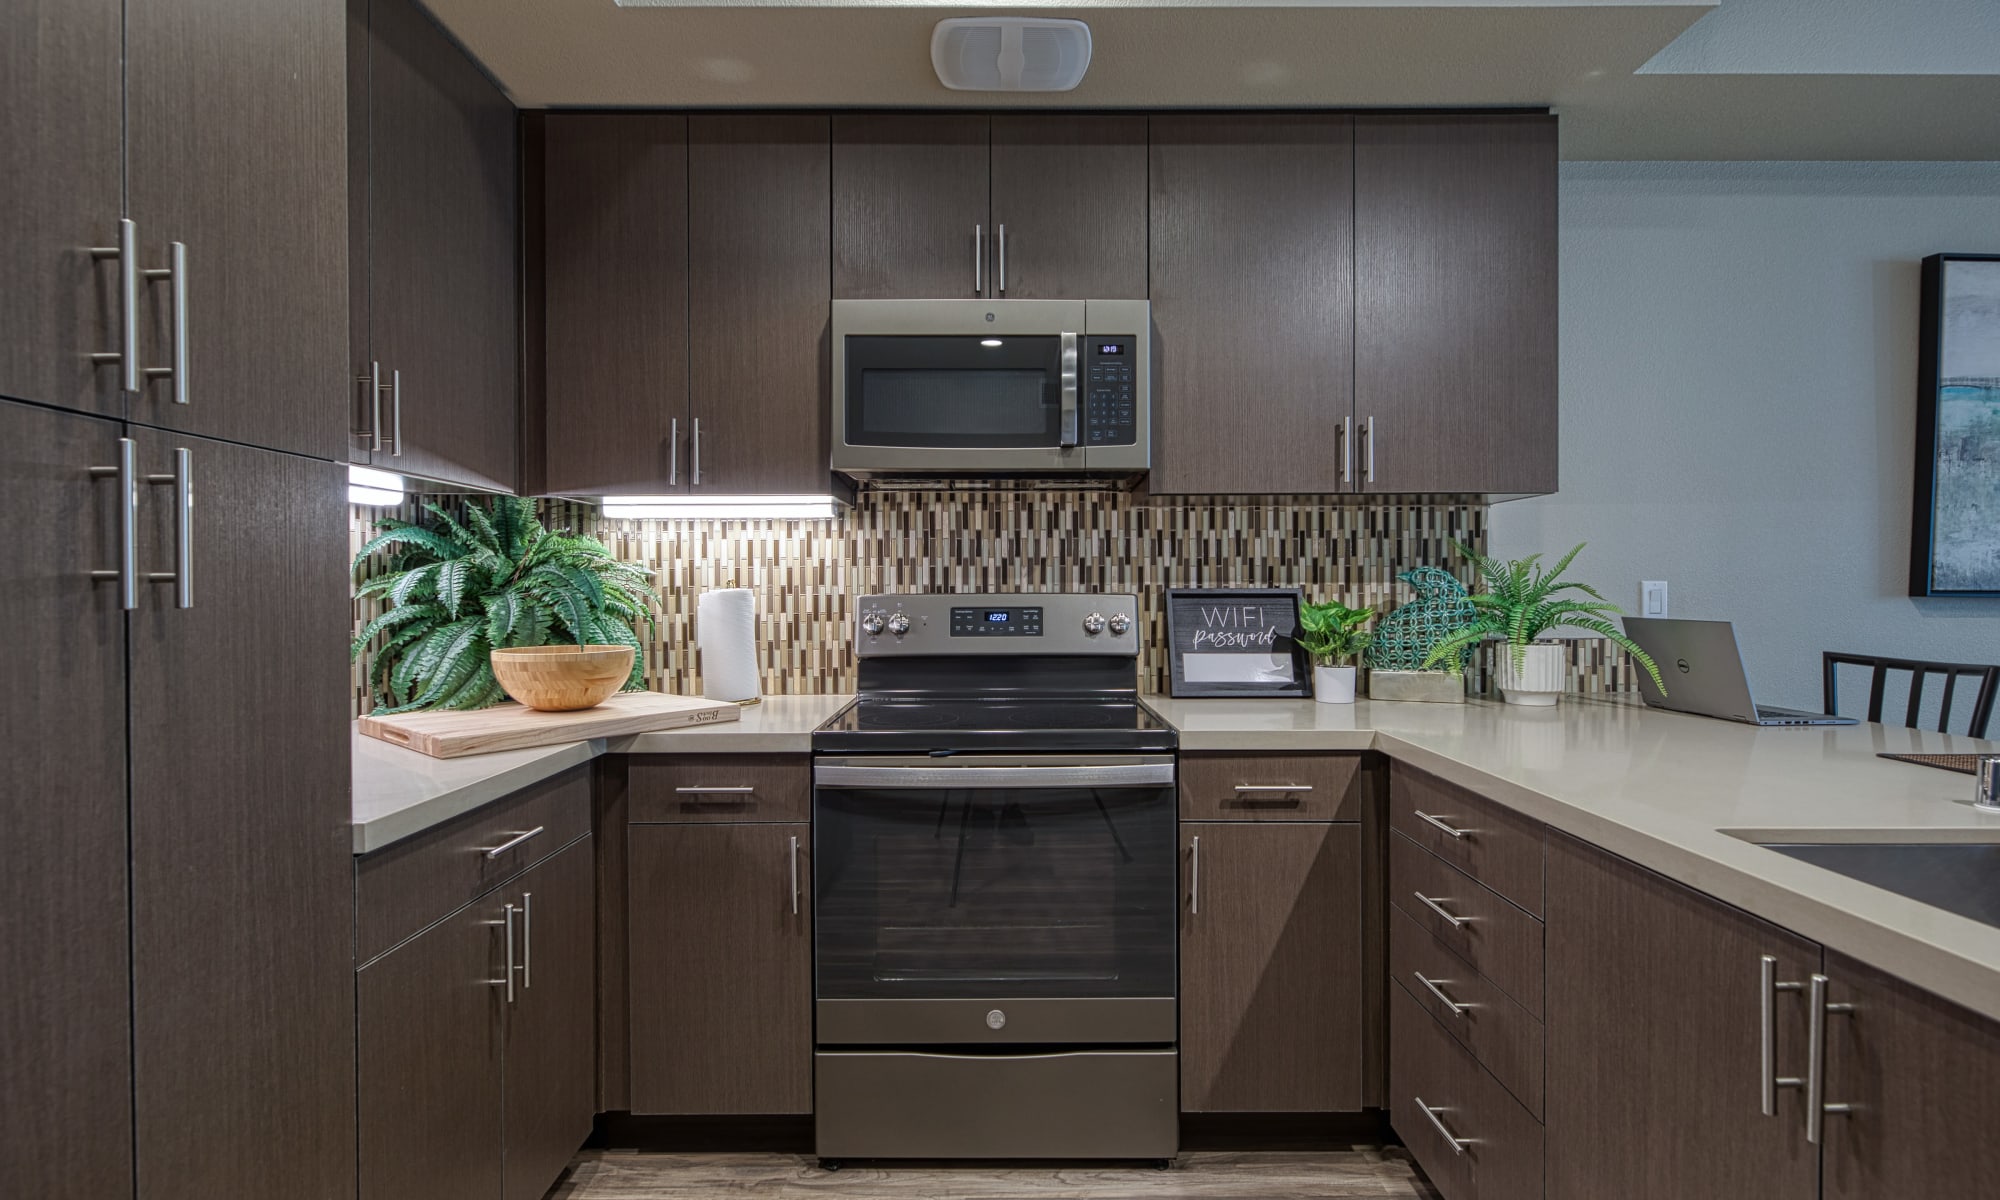 Vespaio in San Jose, California features a kitchen with dark cabinets and ample storage